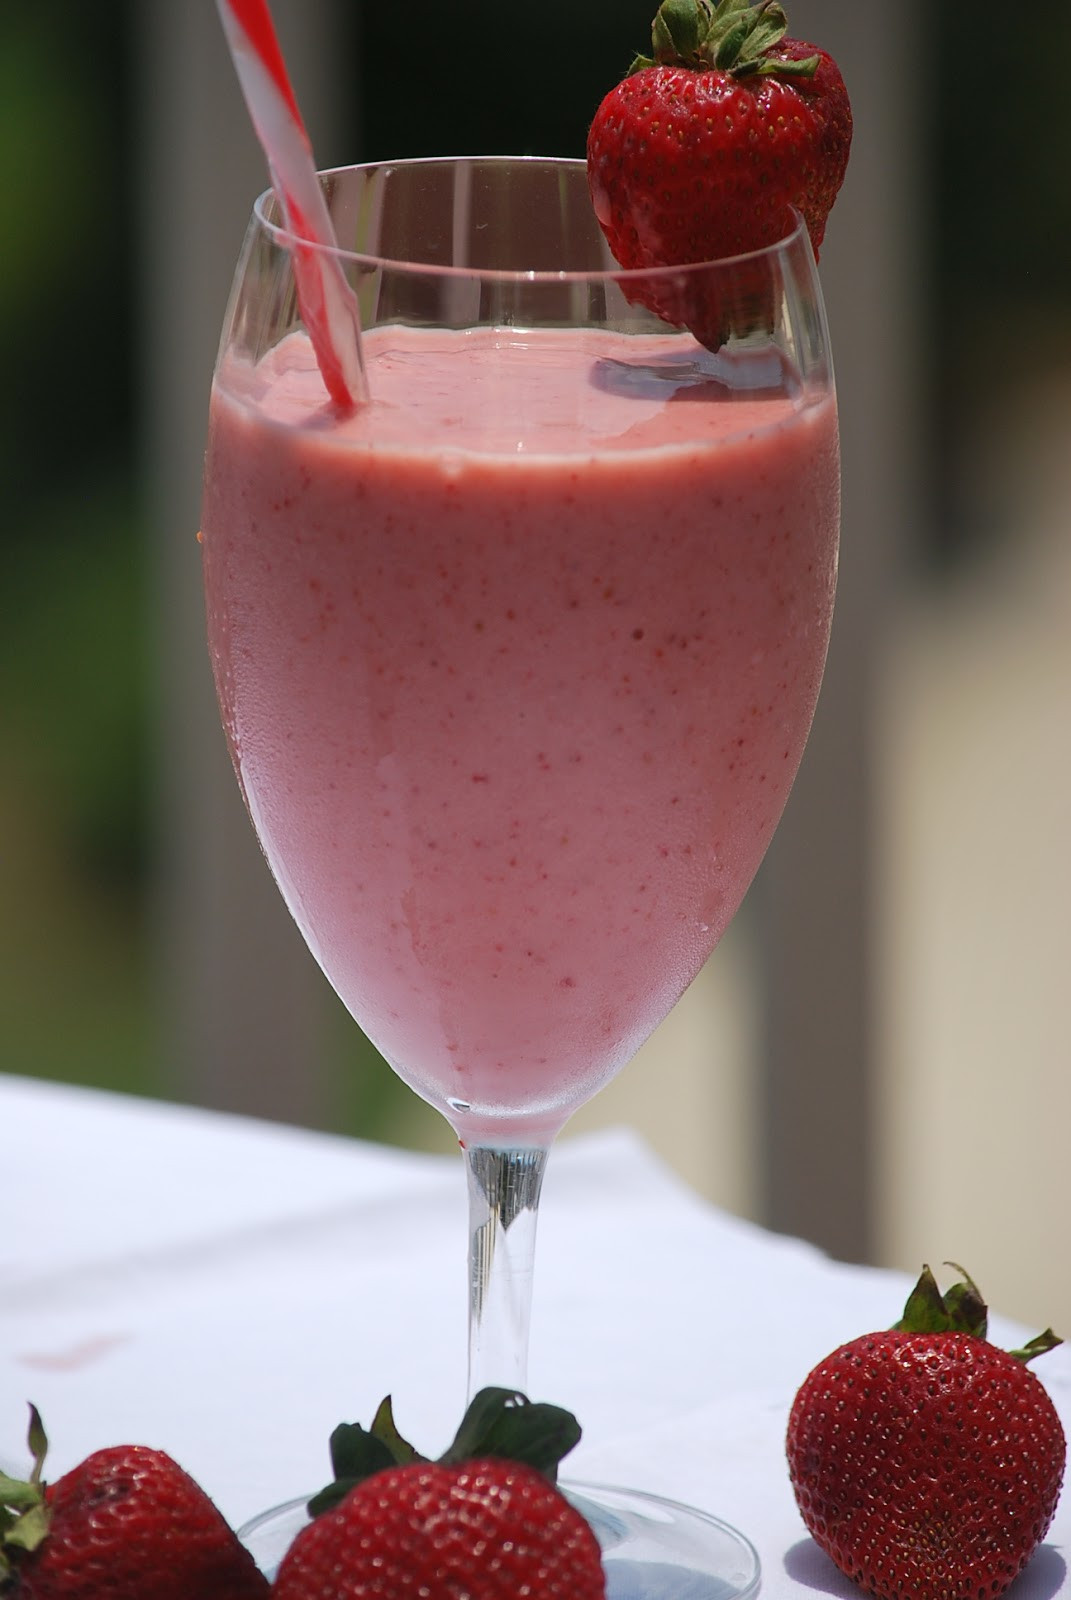 Strawberry Banana Smoothies
 My story in recipes Strawberry Banana Smoothie